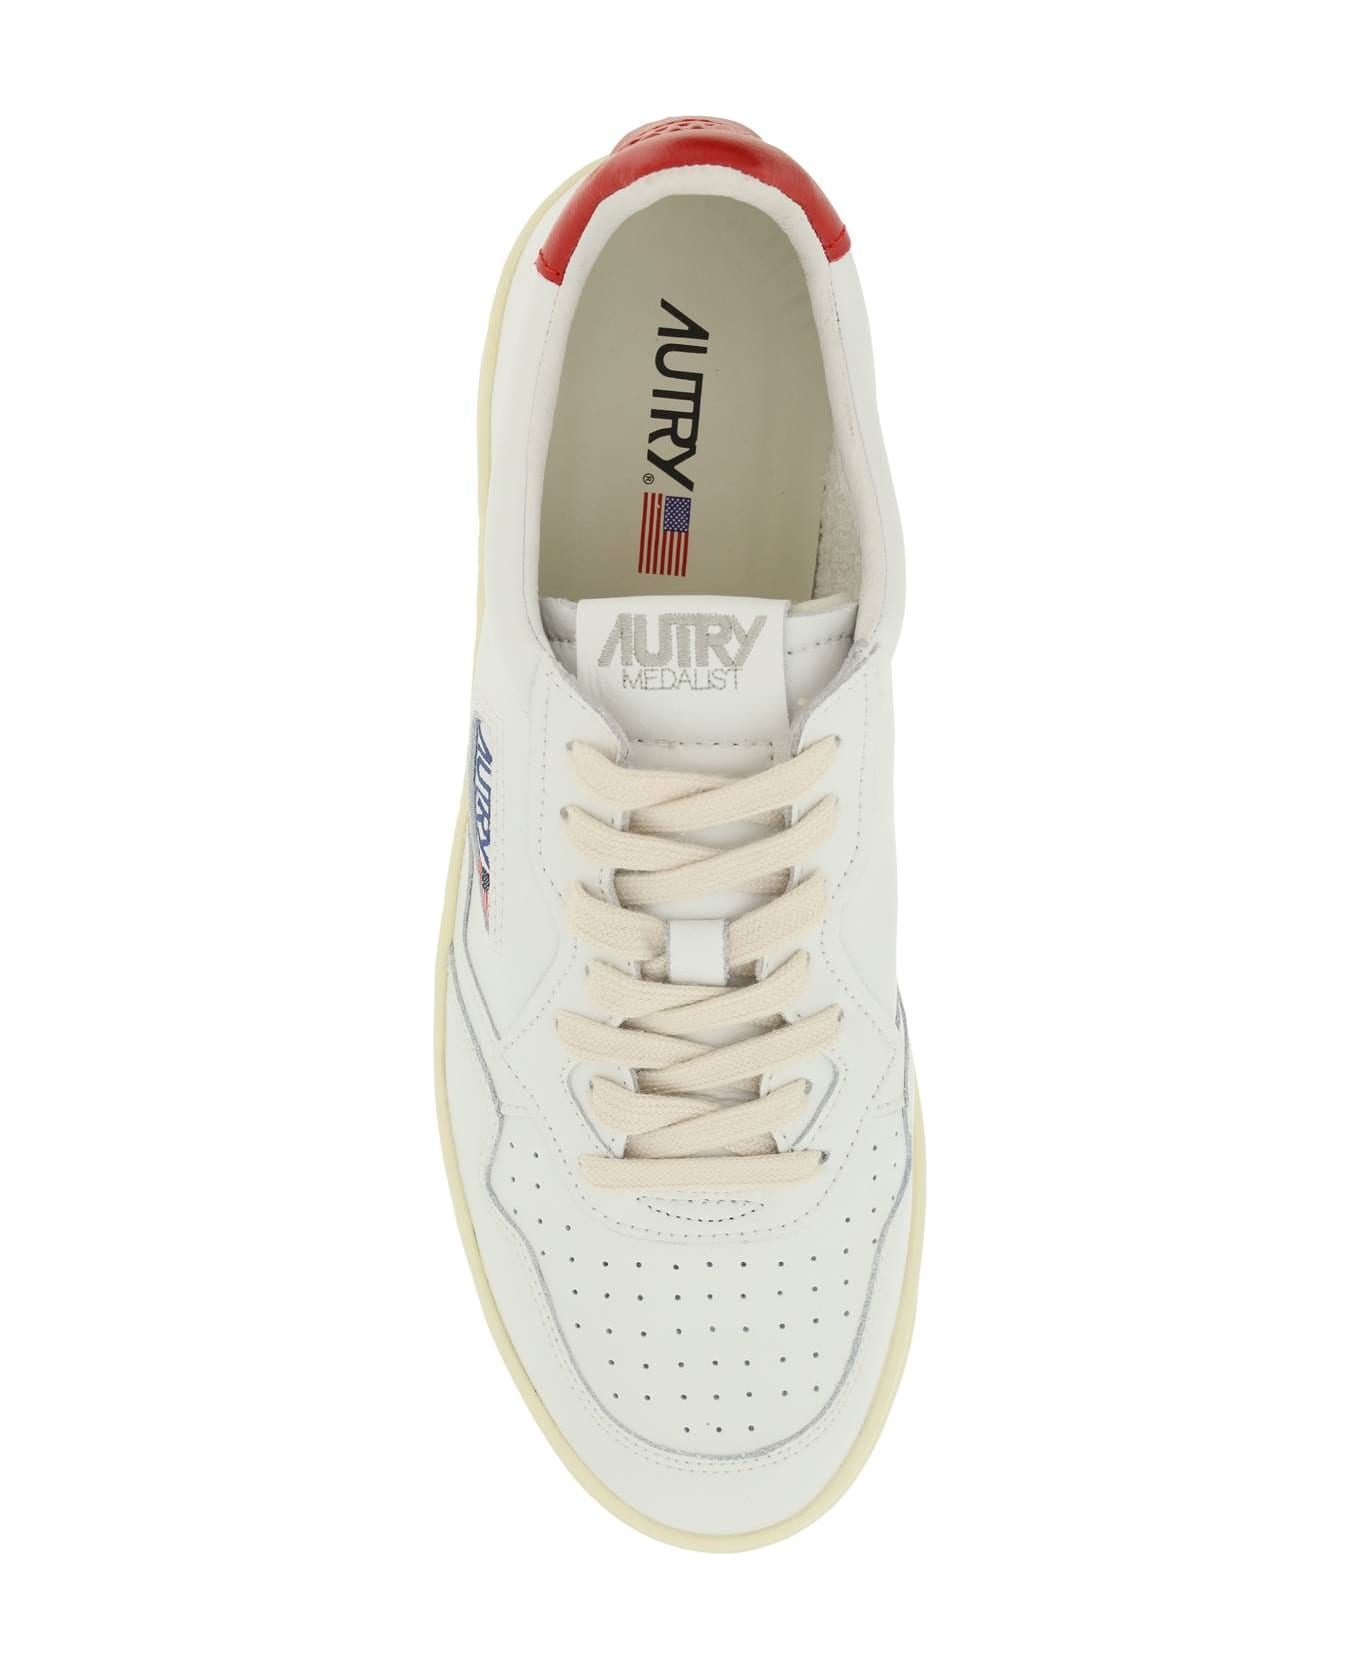 Autry Medalist Low Sneakers In White And Red Leather - White